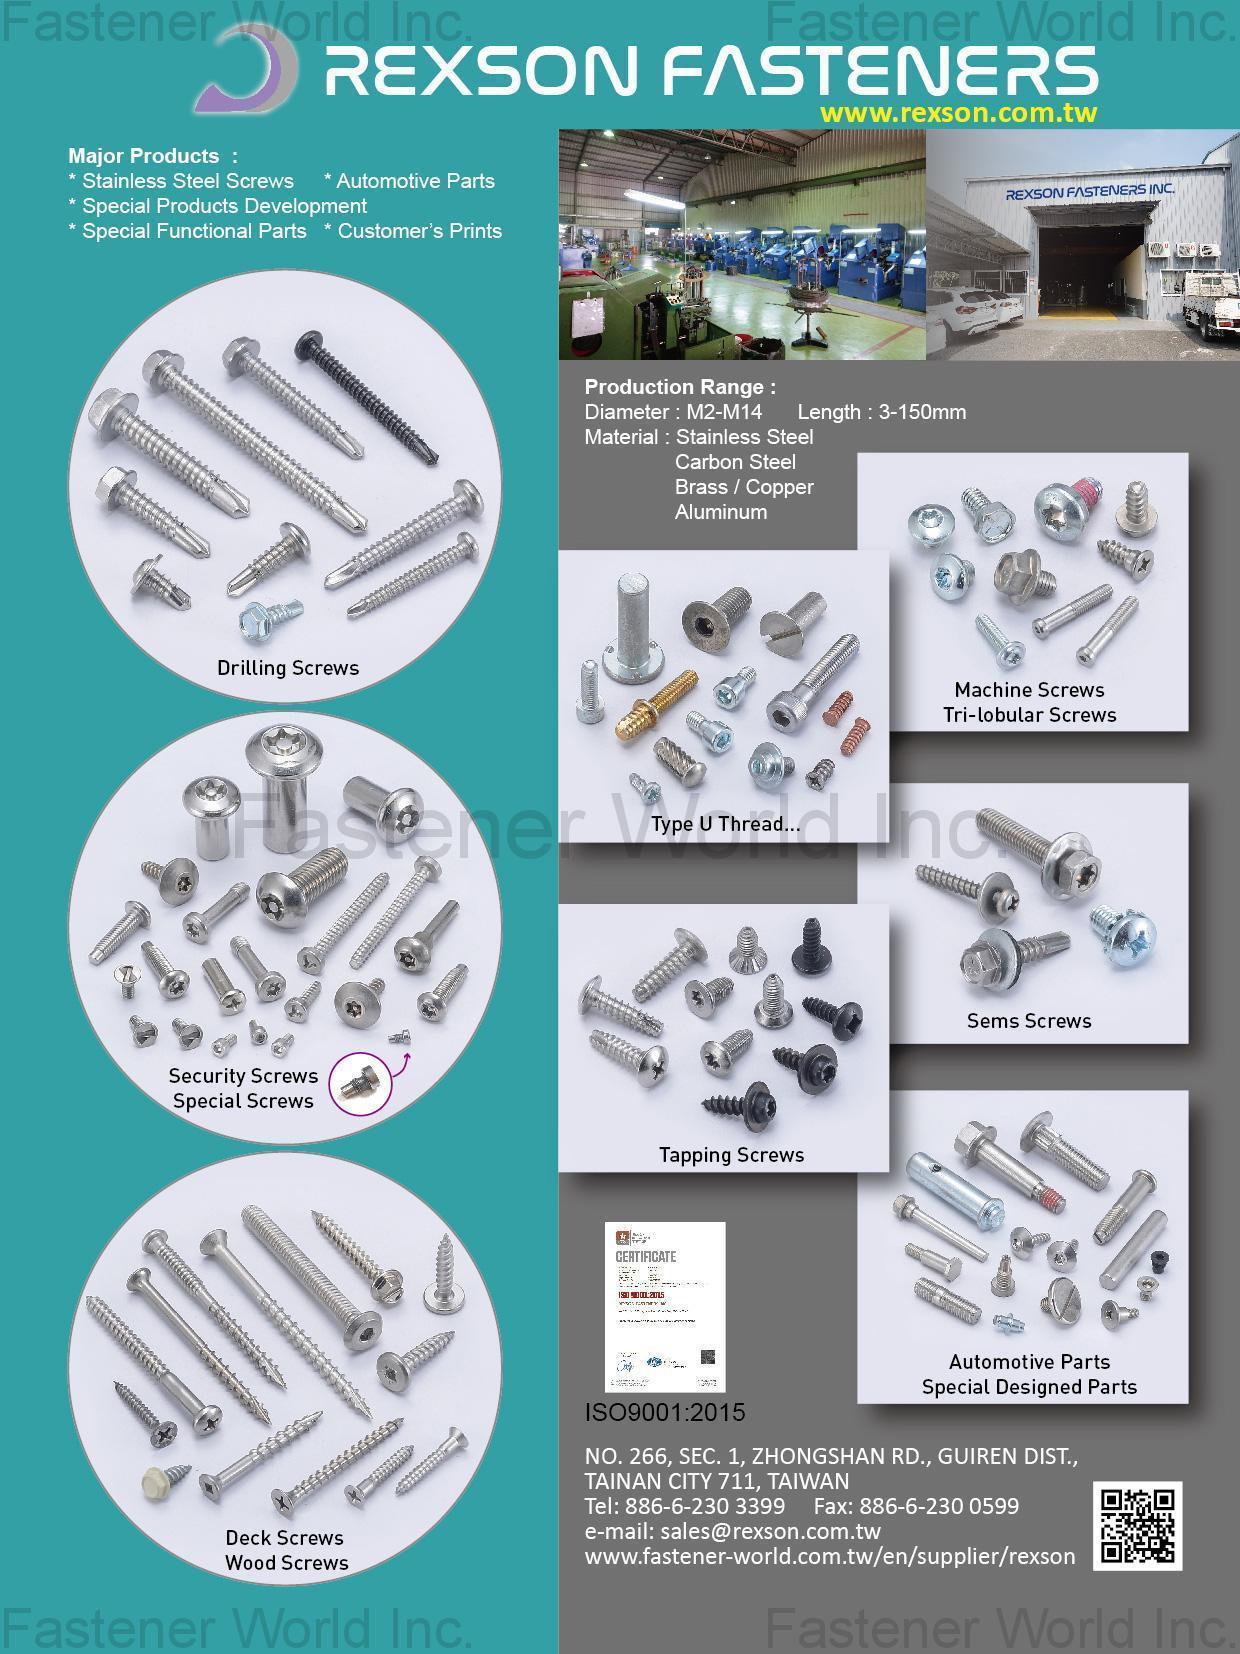 REXSON FASTENERS INC. , Stainless Steel Screws, Automotive Parts, Special Products Development, Special Functional Parts, Customer's Prints, Drilling Screws, Type U Thread, Security Screws, Special Screws, Deck Screws, Wood Screws, Tapping Screws, Machine Screws, Tri-lobular Screws, Sems Screws, Automotive Parts, Special Designed Parts , Special Screws